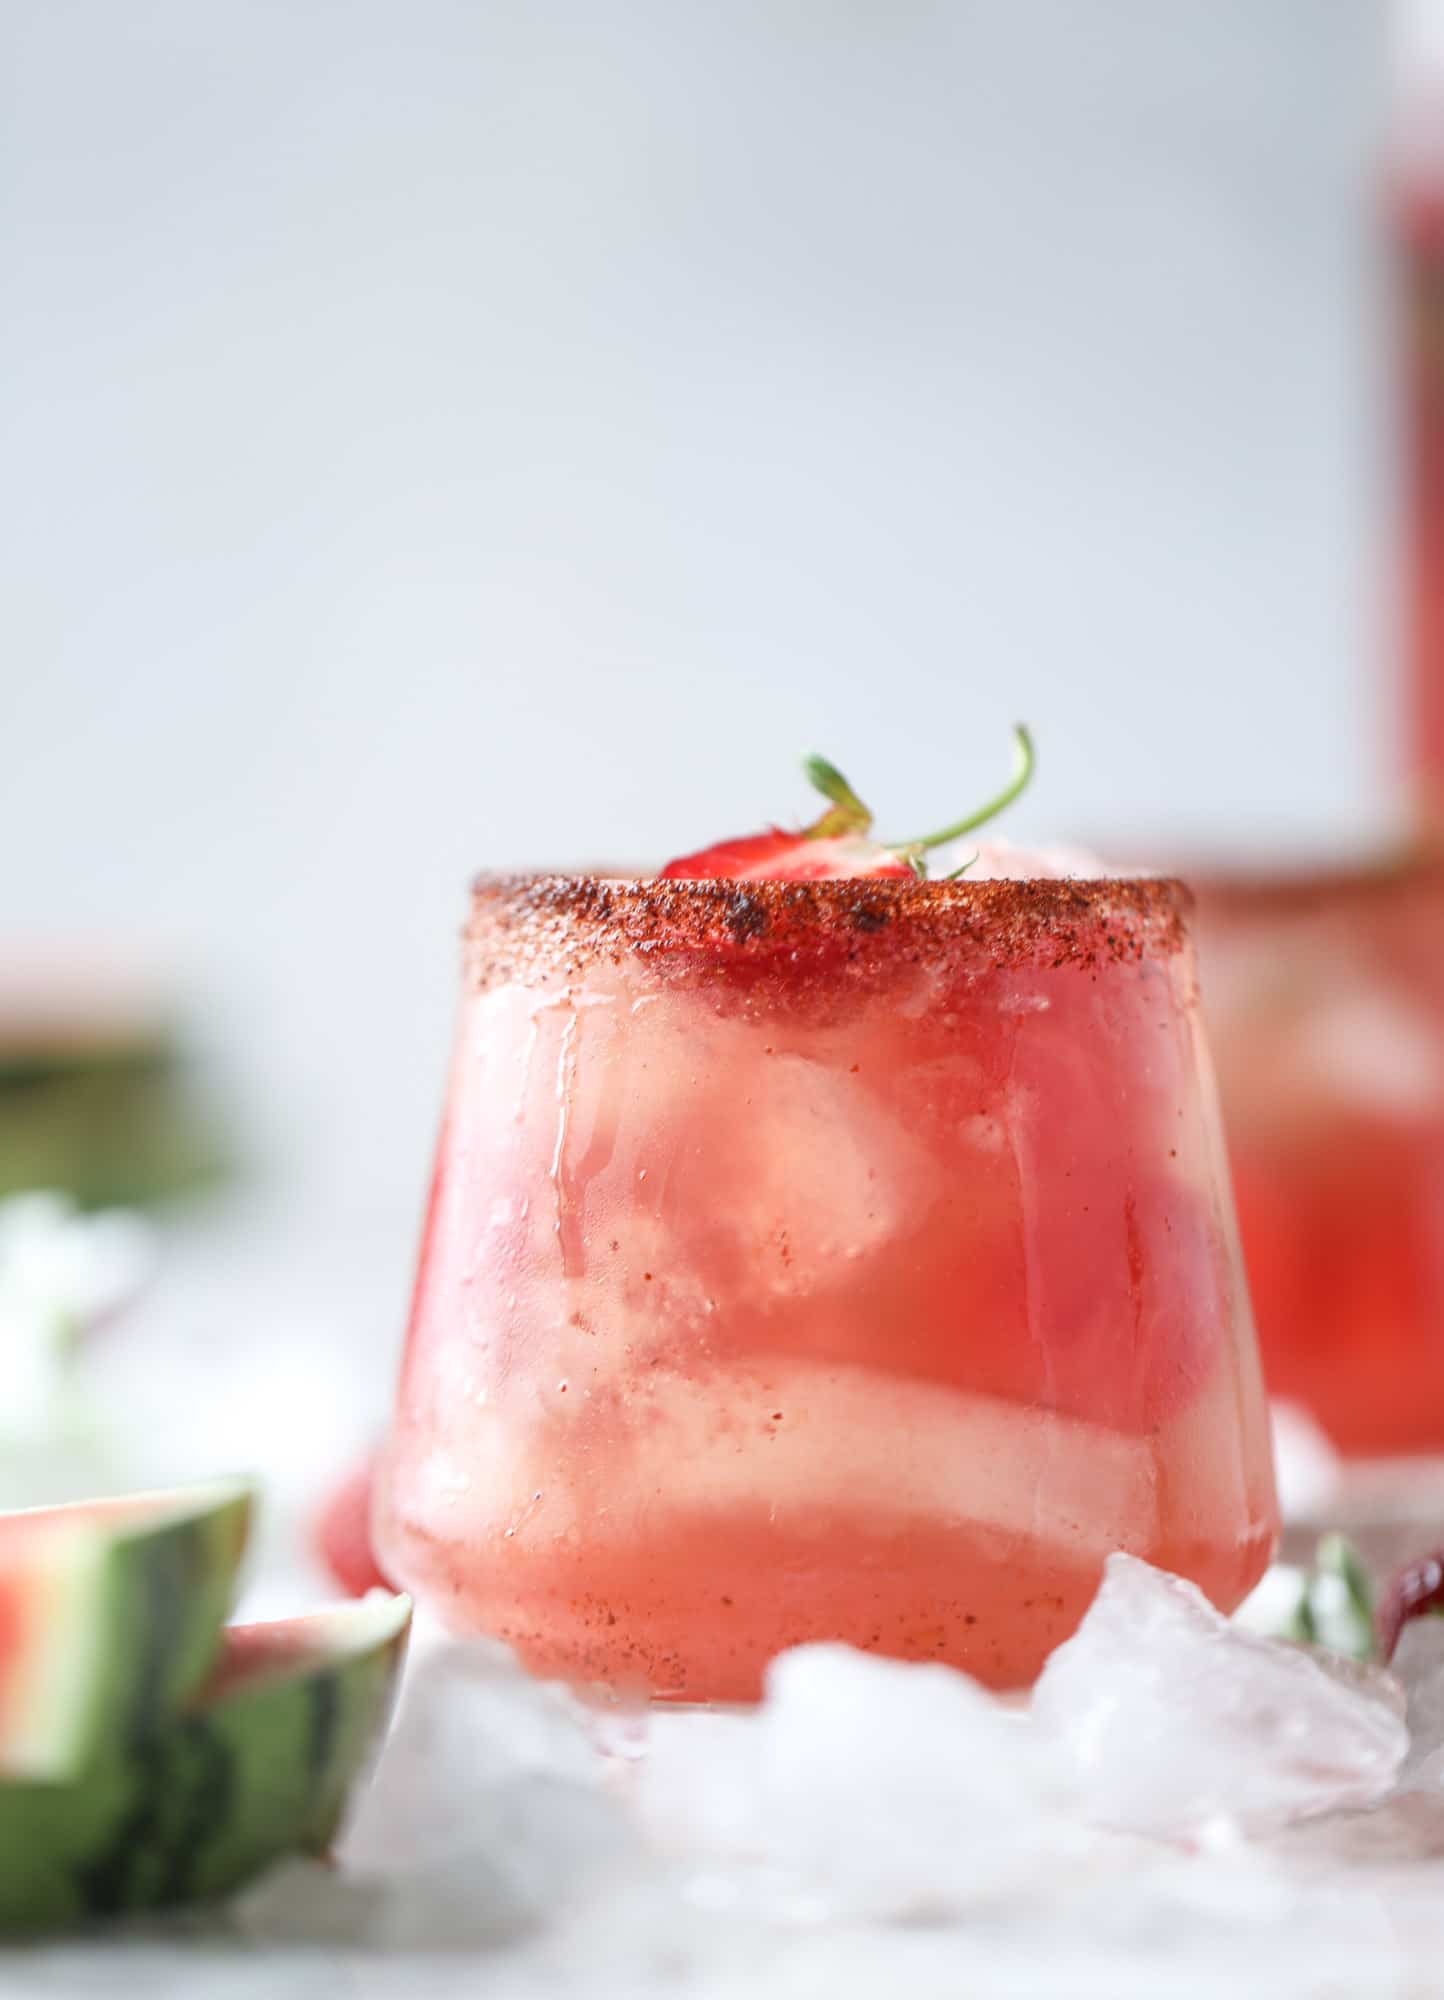 This spicy watermelon sangria is super refreshing, light, delicious and perfect for a hot summer day! Complete with an entire bottle of rosé, watermelon juice, melon balls, strawberries and brandy, this is the best summer cocktail in a pitcher! I howsweeteats.com #spicy #watermelon #sangria #cocktails #rosé